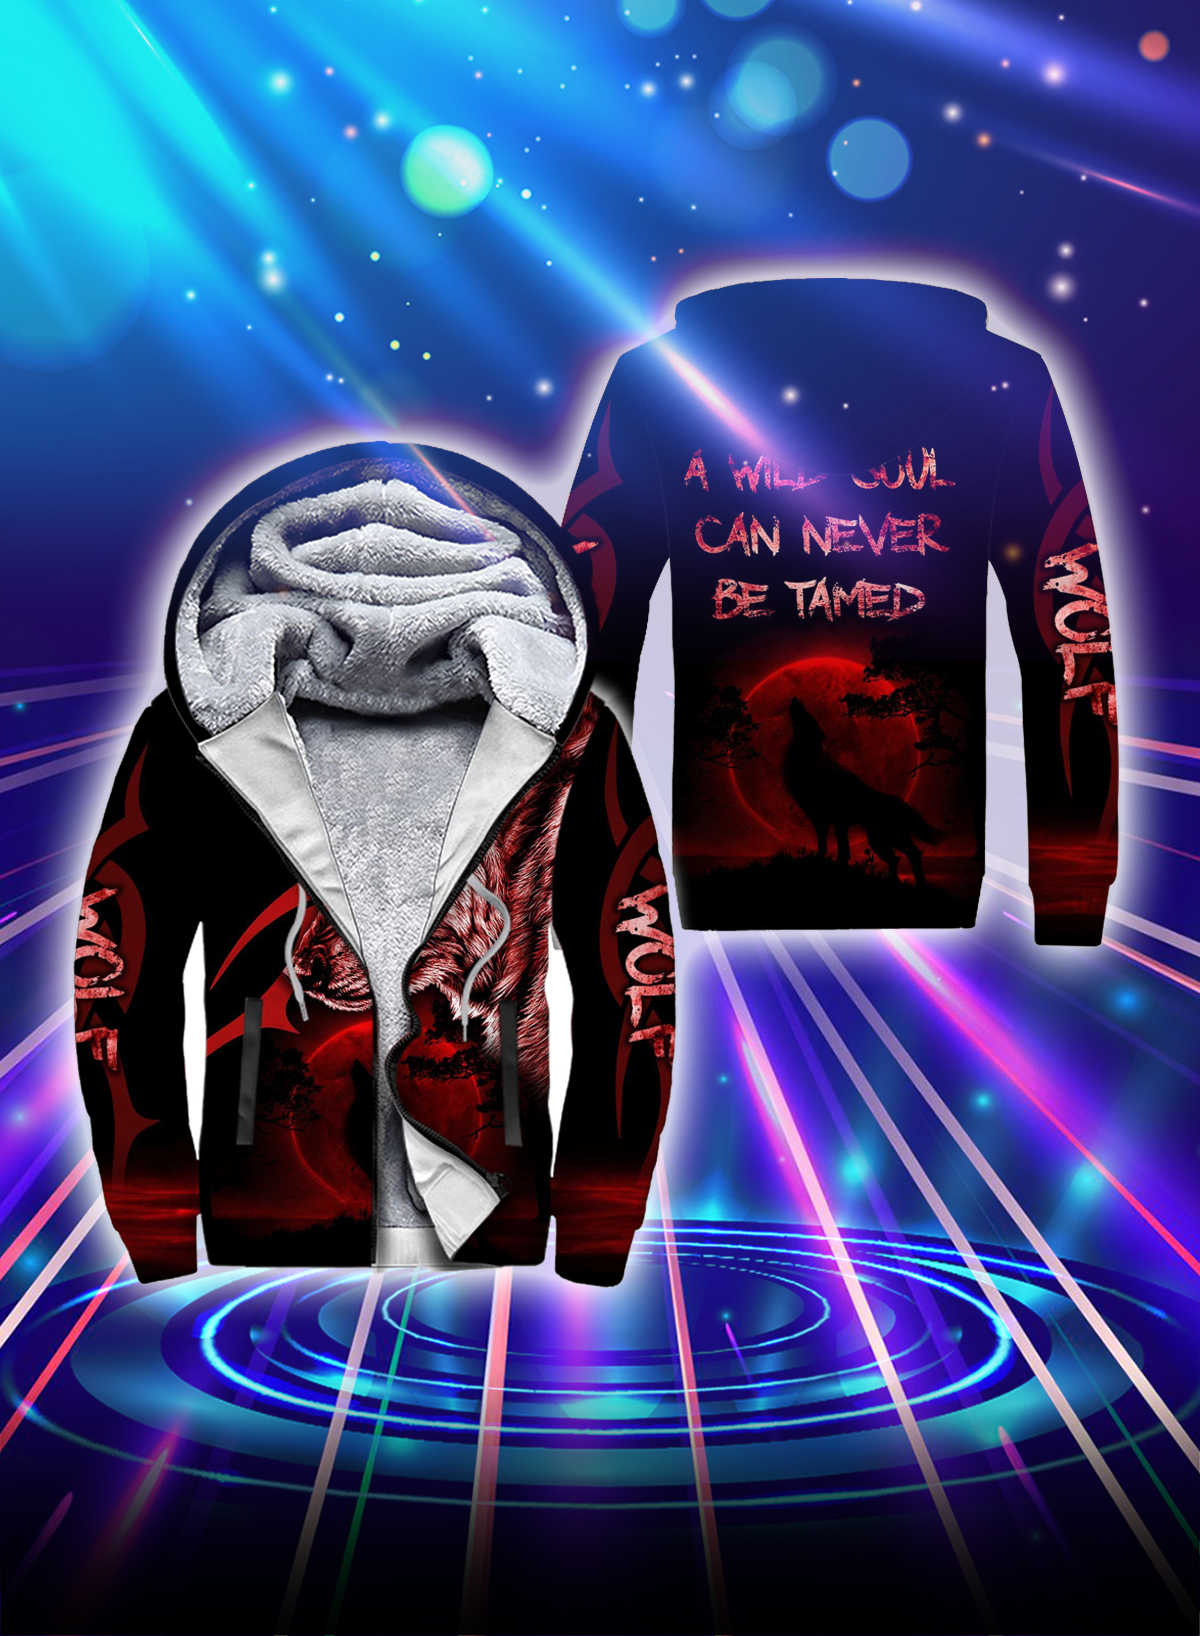 Wolf a wild soul can never be tamed all over printed fleece hoodie